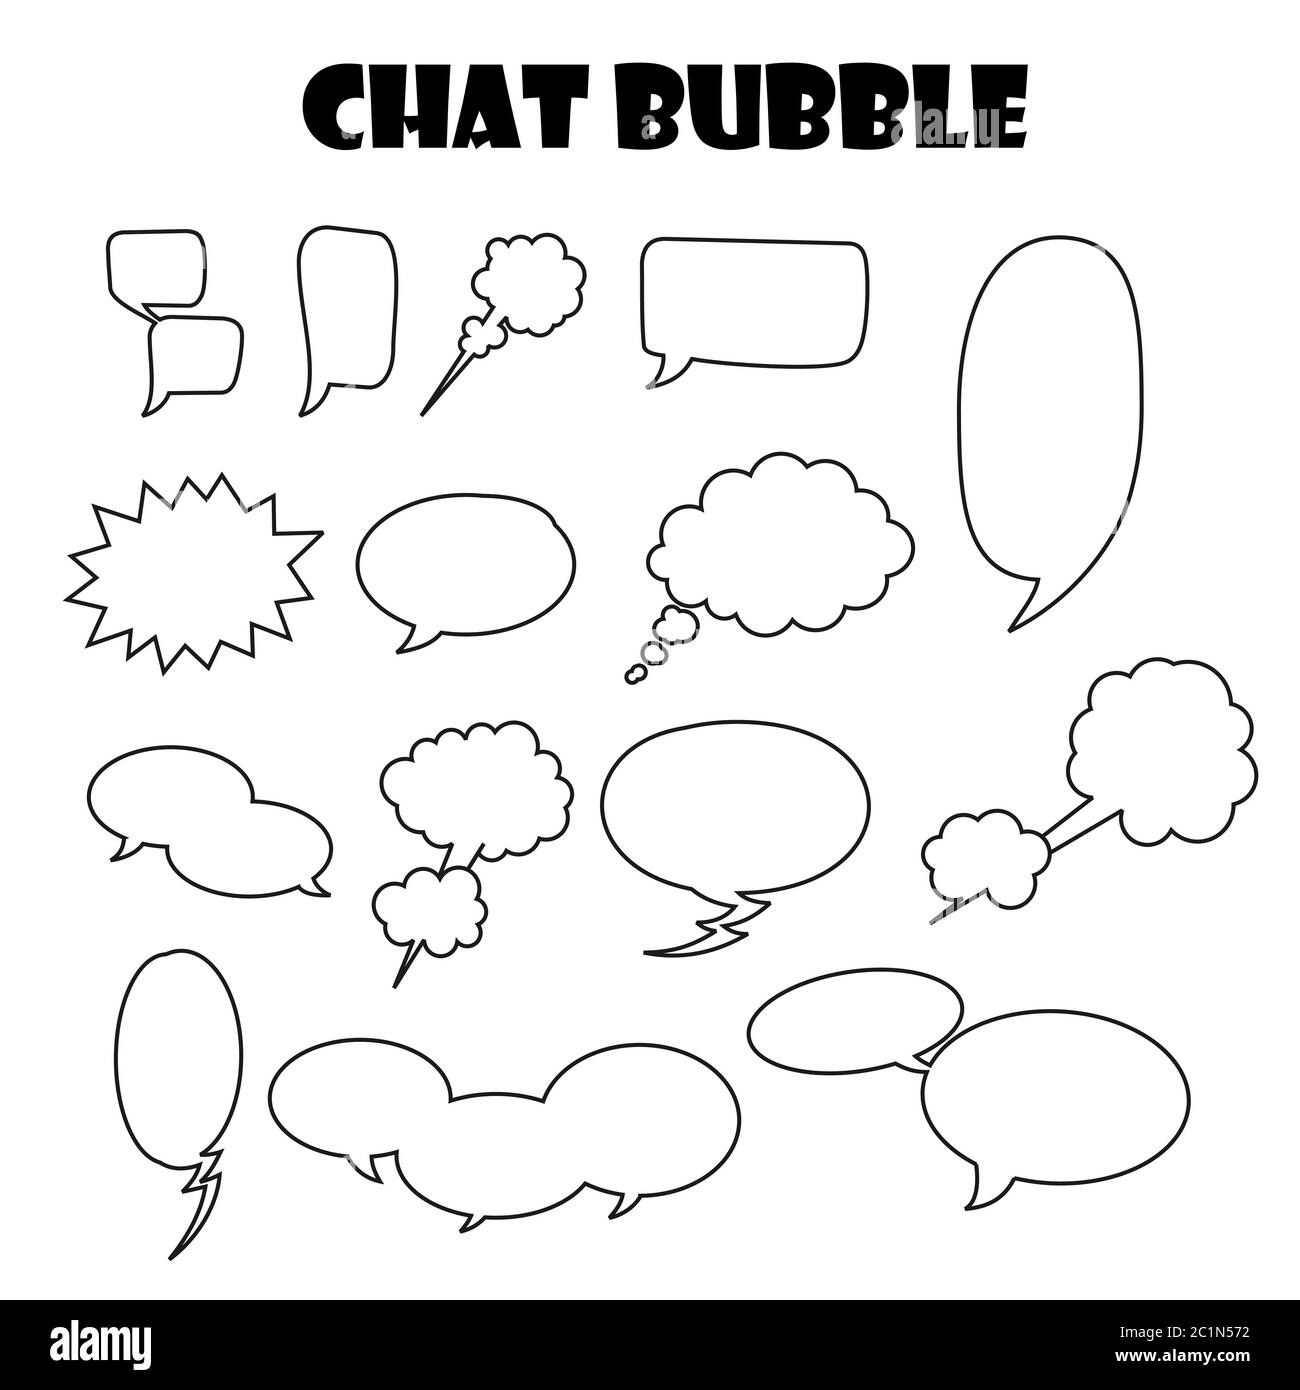 Vector illustration of a speech bubble. Suitable for graphic elements of conversational illustrations, illustrated stories and comic designs Stock Vector